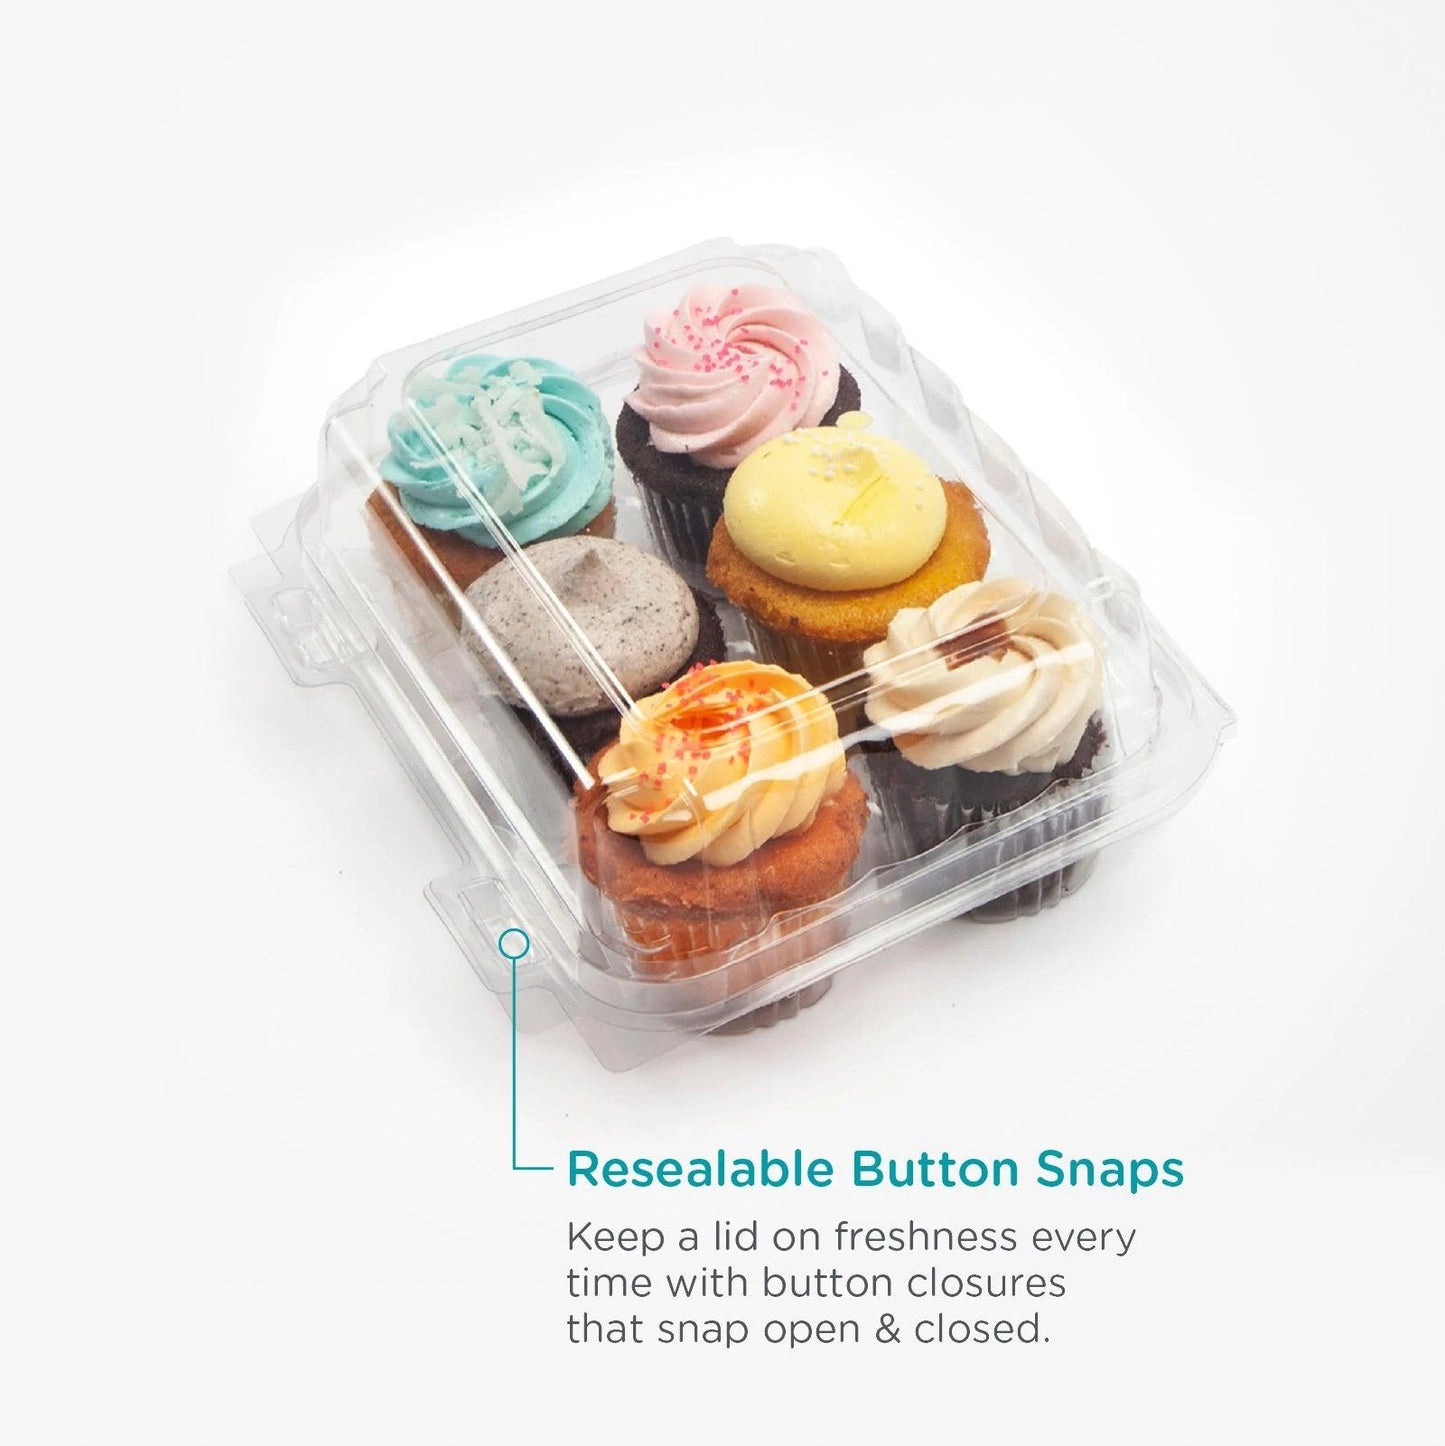 2.25" Mini Cupcake & Muffin | Clear Compostable 6 Pack Container